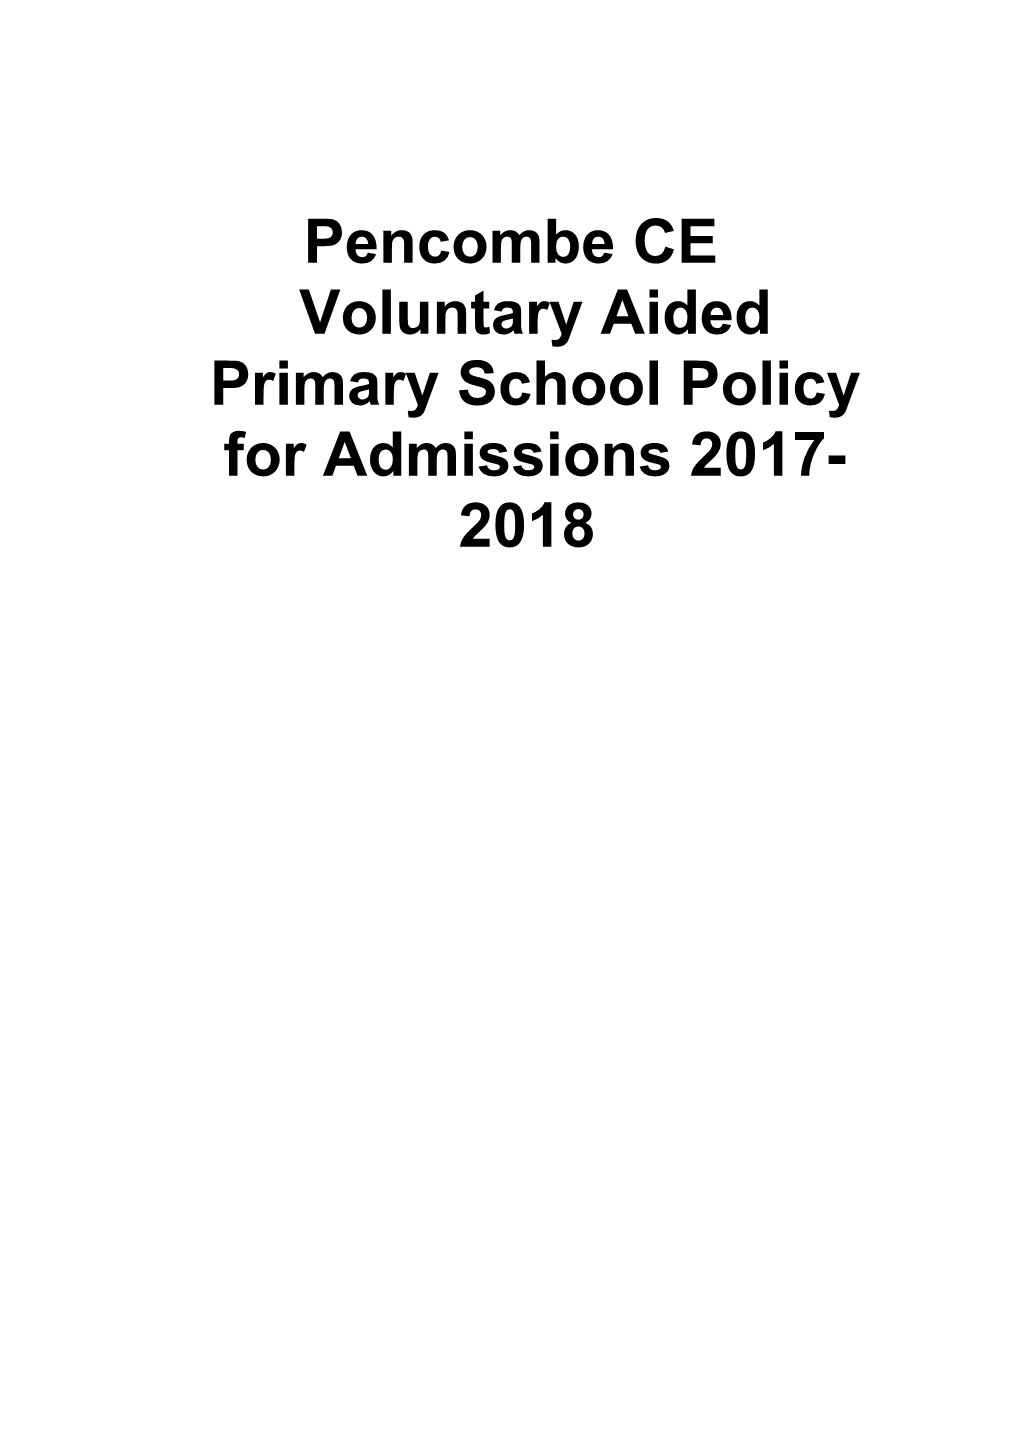 Pencombe CE Primary School Admissions Policy 2017/18